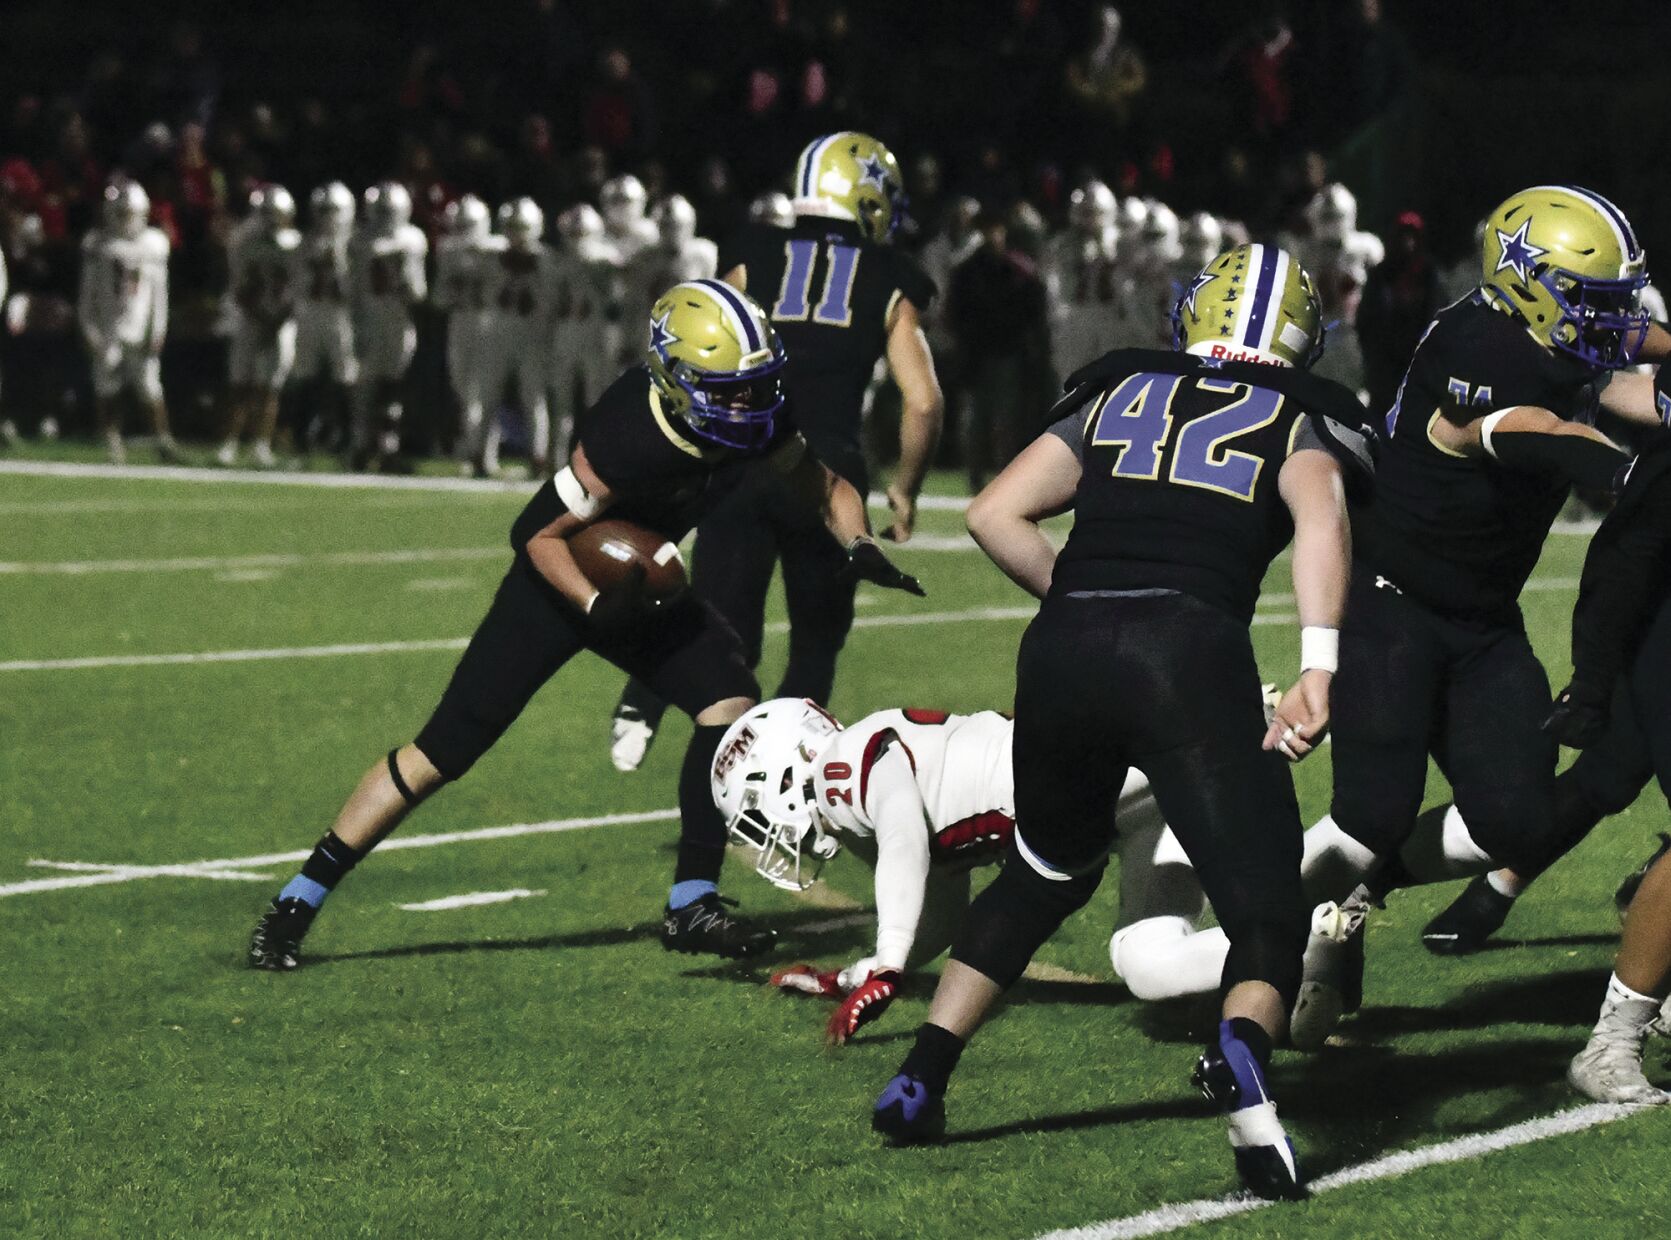 Red Knights late rally, interception stops Stars in section final, 20-15